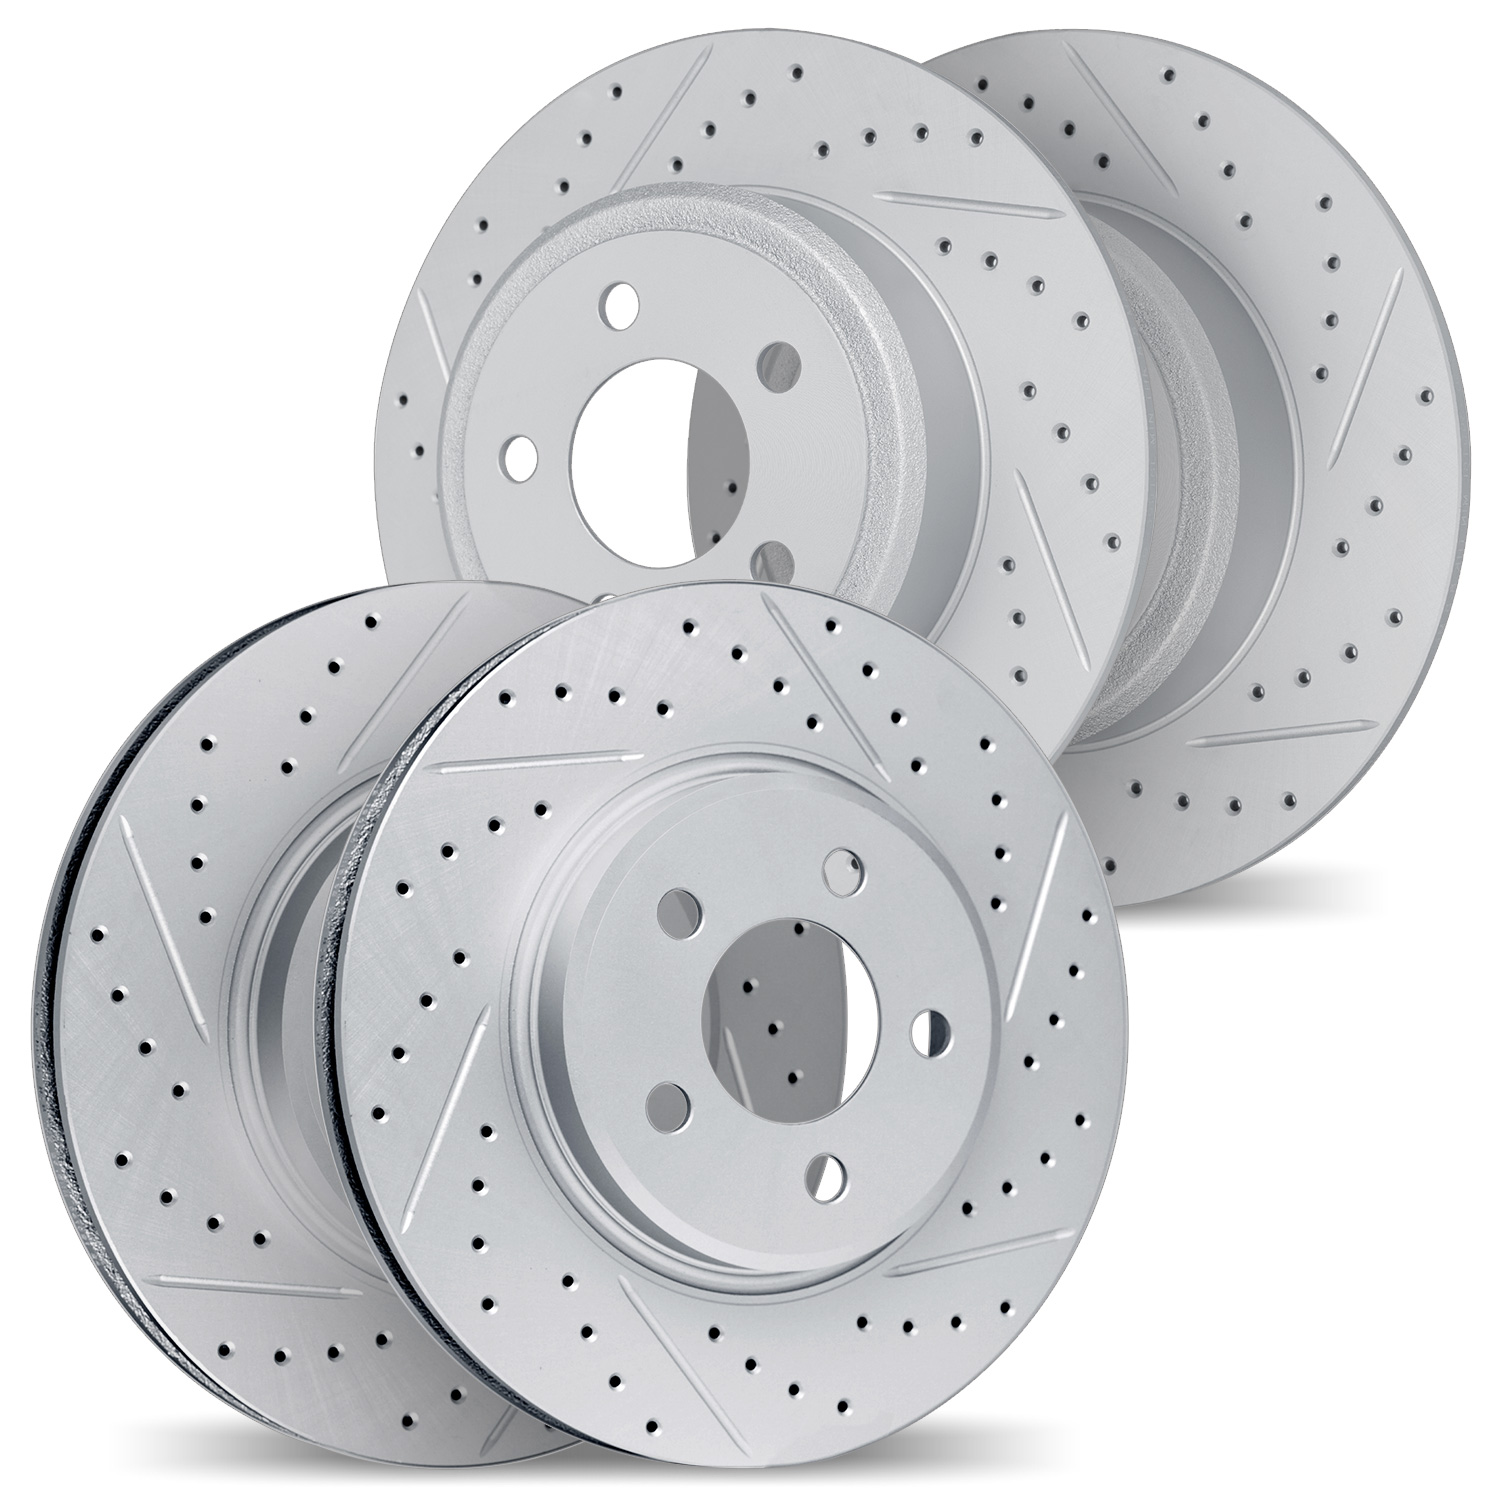 2004-76017 Geoperformance Drilled/Slotted Brake Rotors, 2010-2020 Lexus/Toyota/Scion, Position: Front and Rear